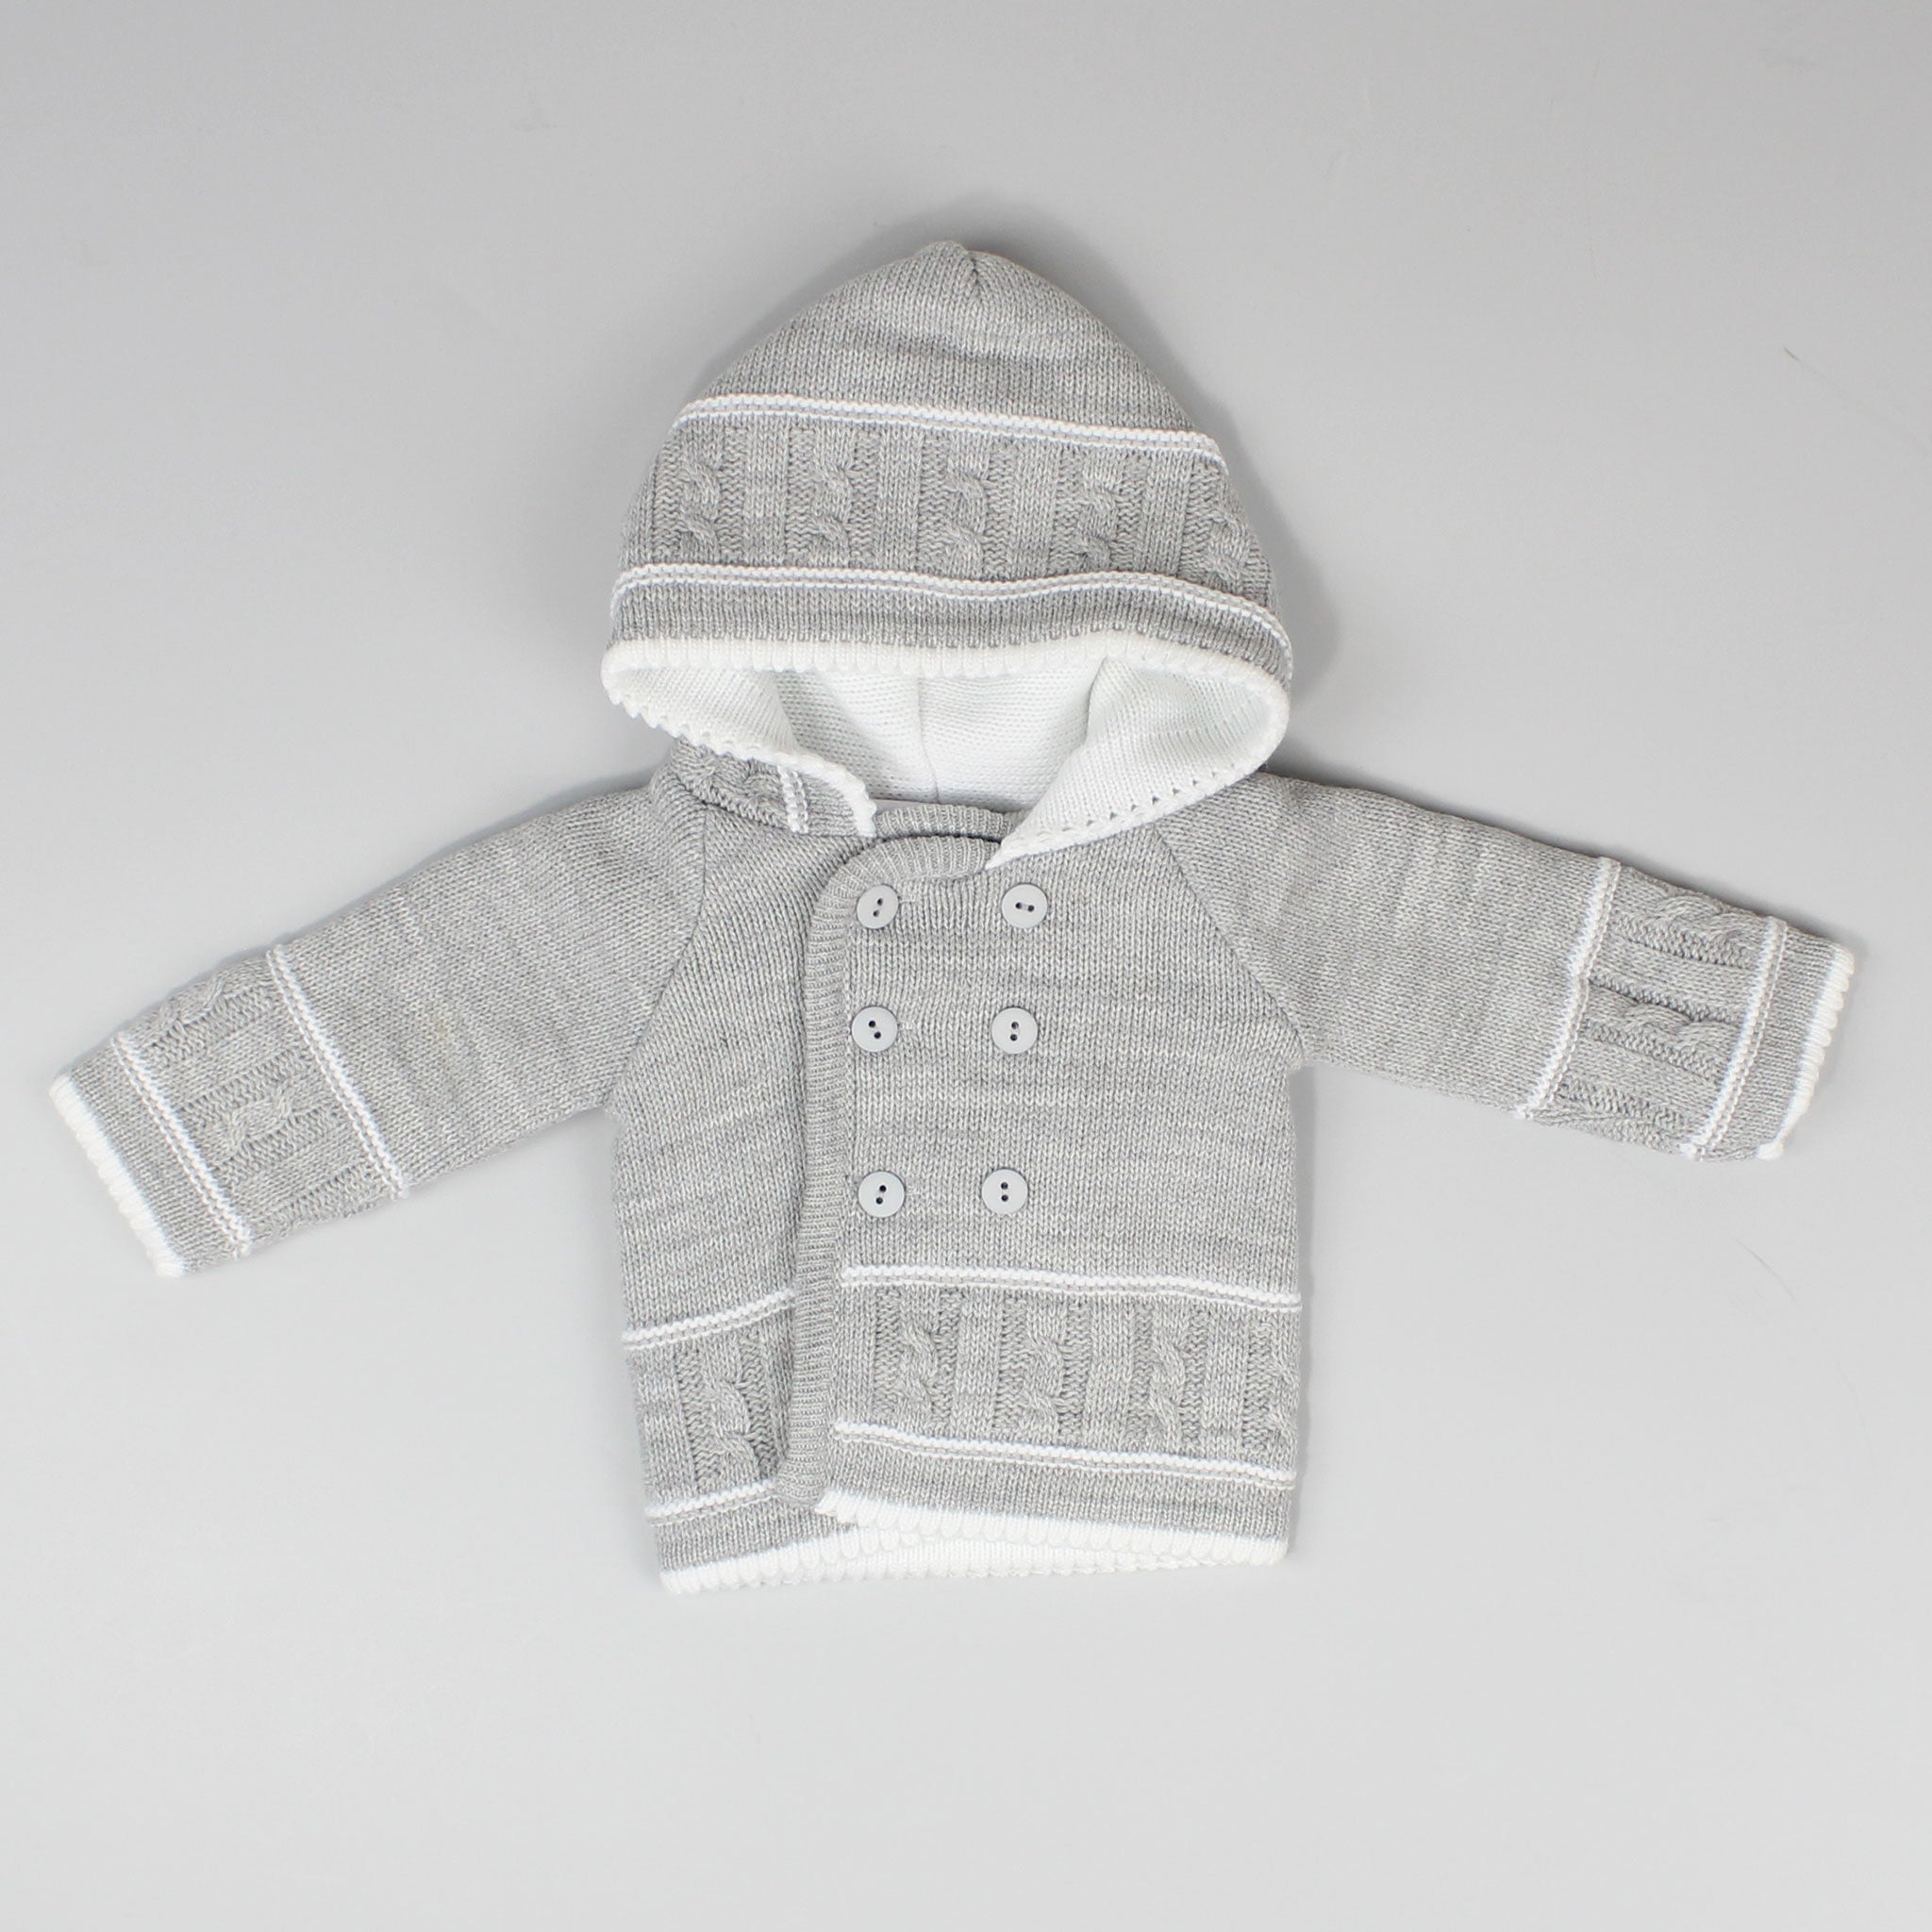 grey and white knitted hooded jacket